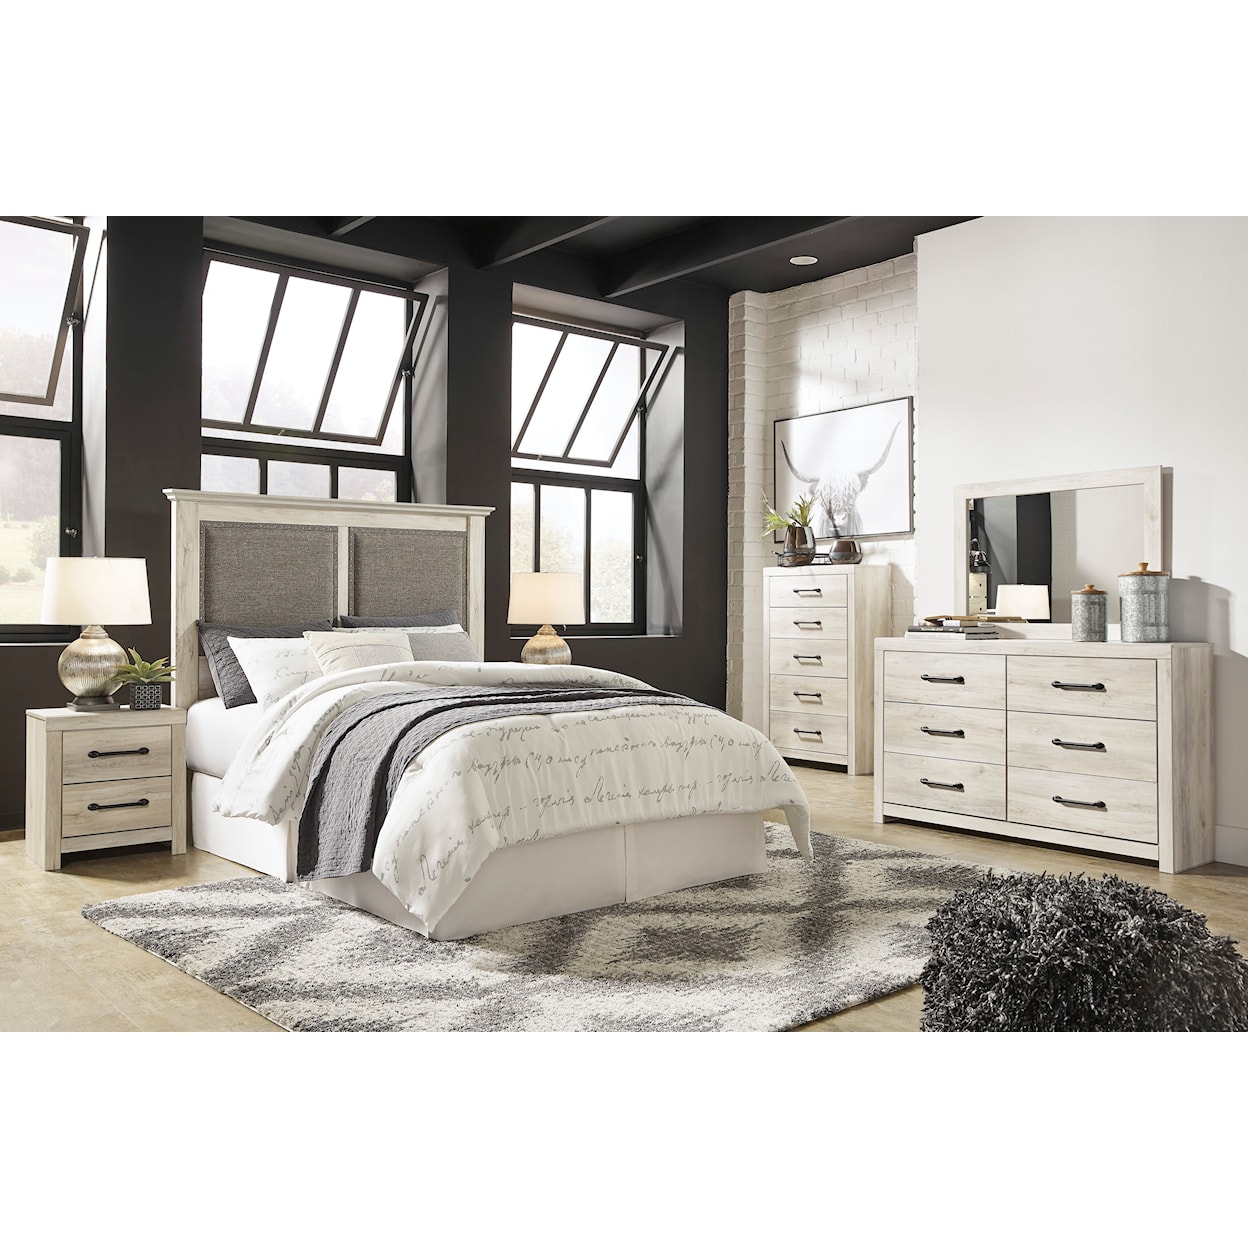 Signature Design by Ashley Furniture Cambeck King Bedroom Set